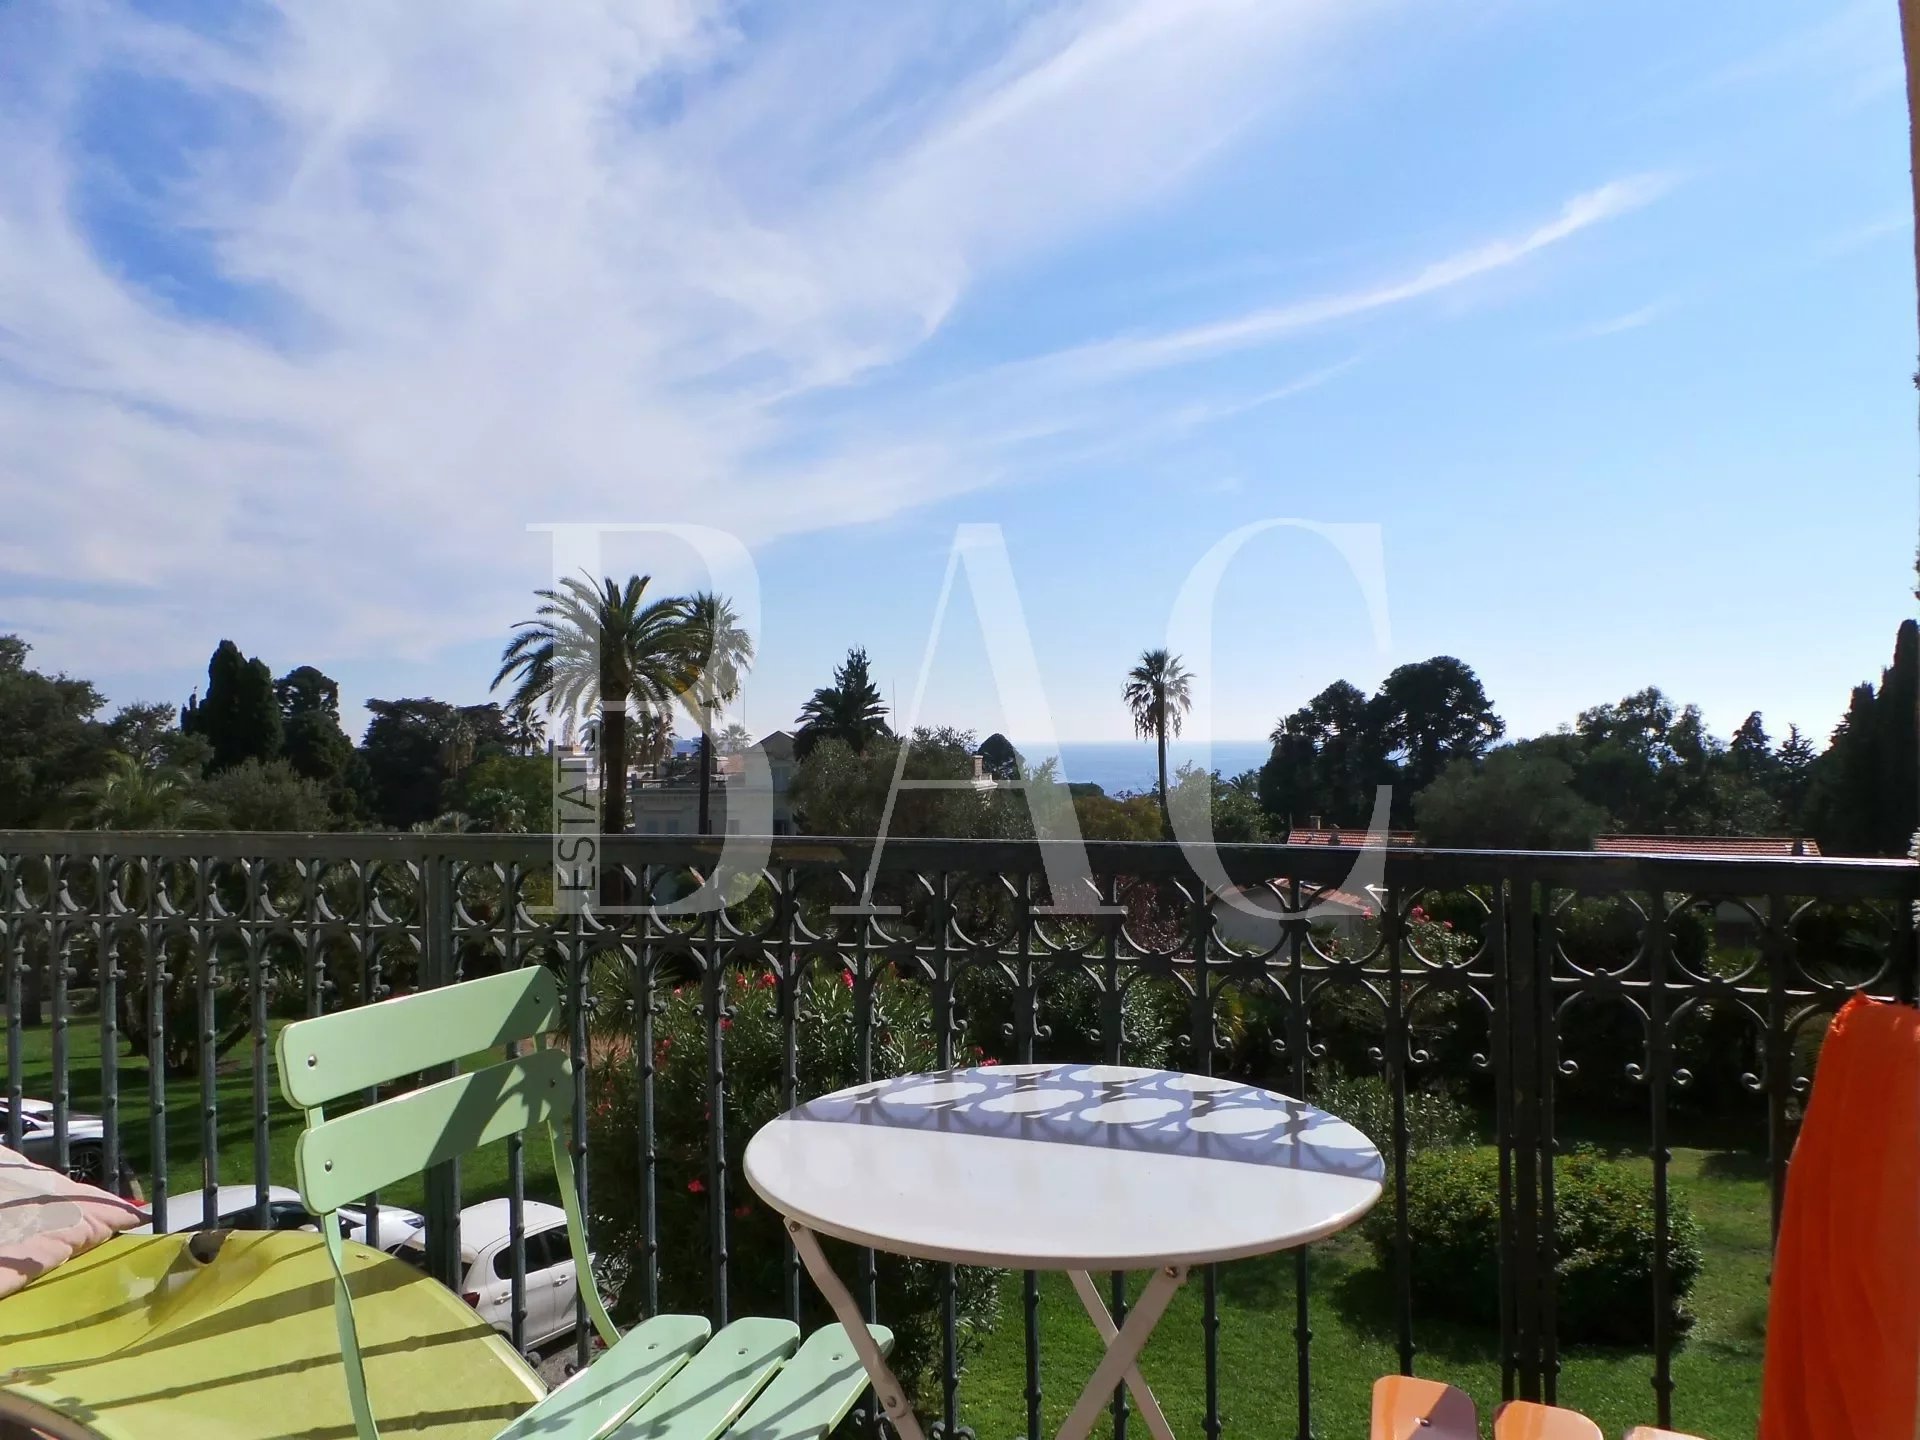 Cannes, 400 meters from the beach and 1000 meters from Forville market